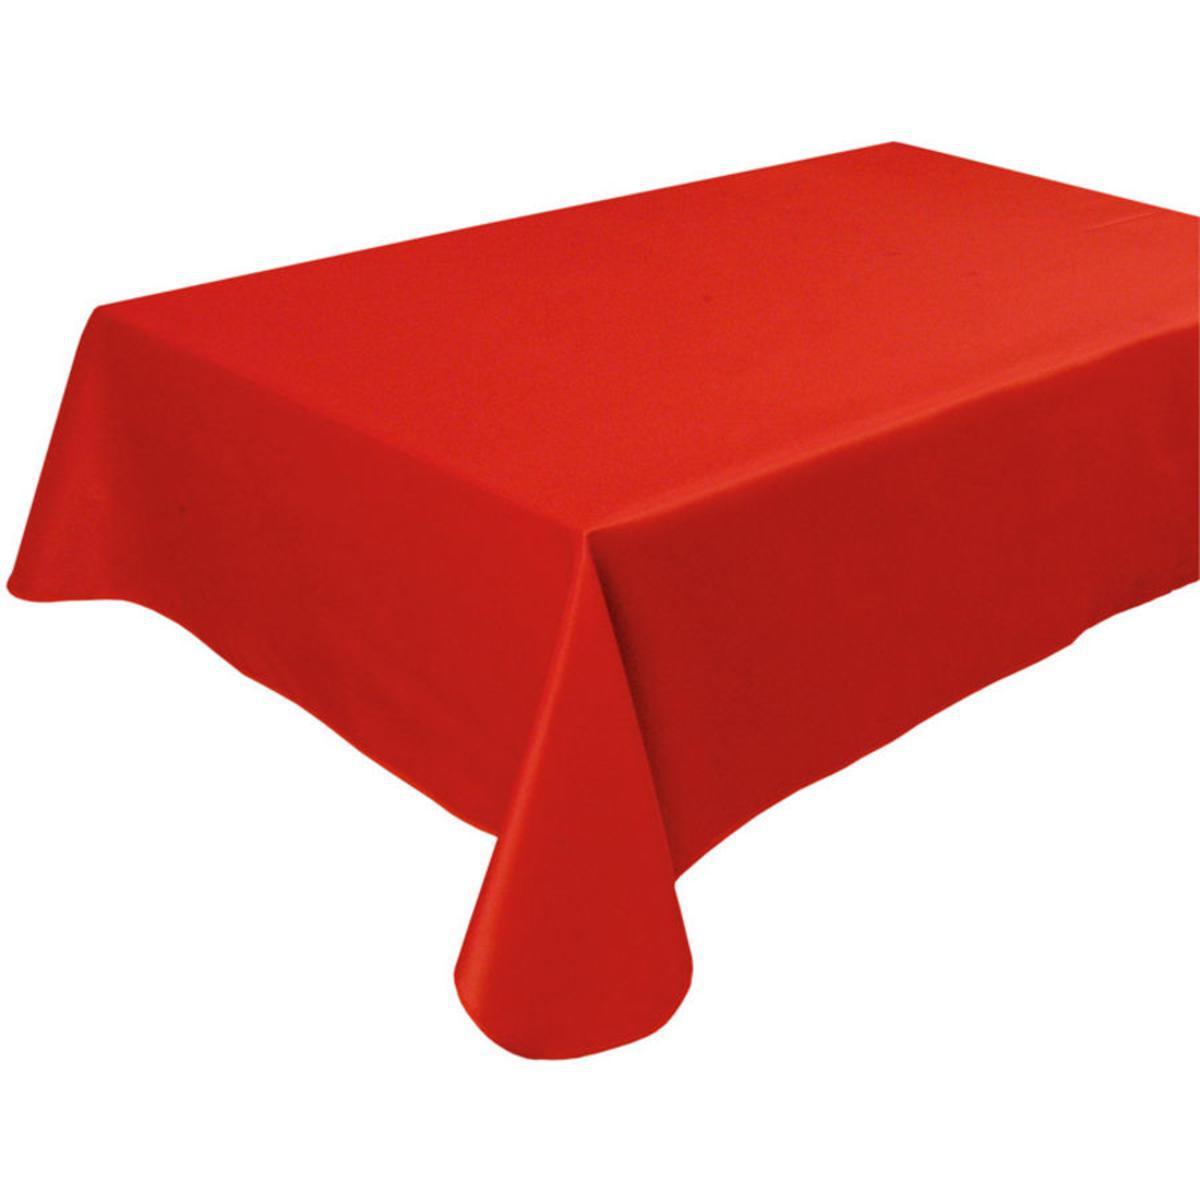 Nappe rectangulaire- Polyester - 140 x 240 cm - Rouge